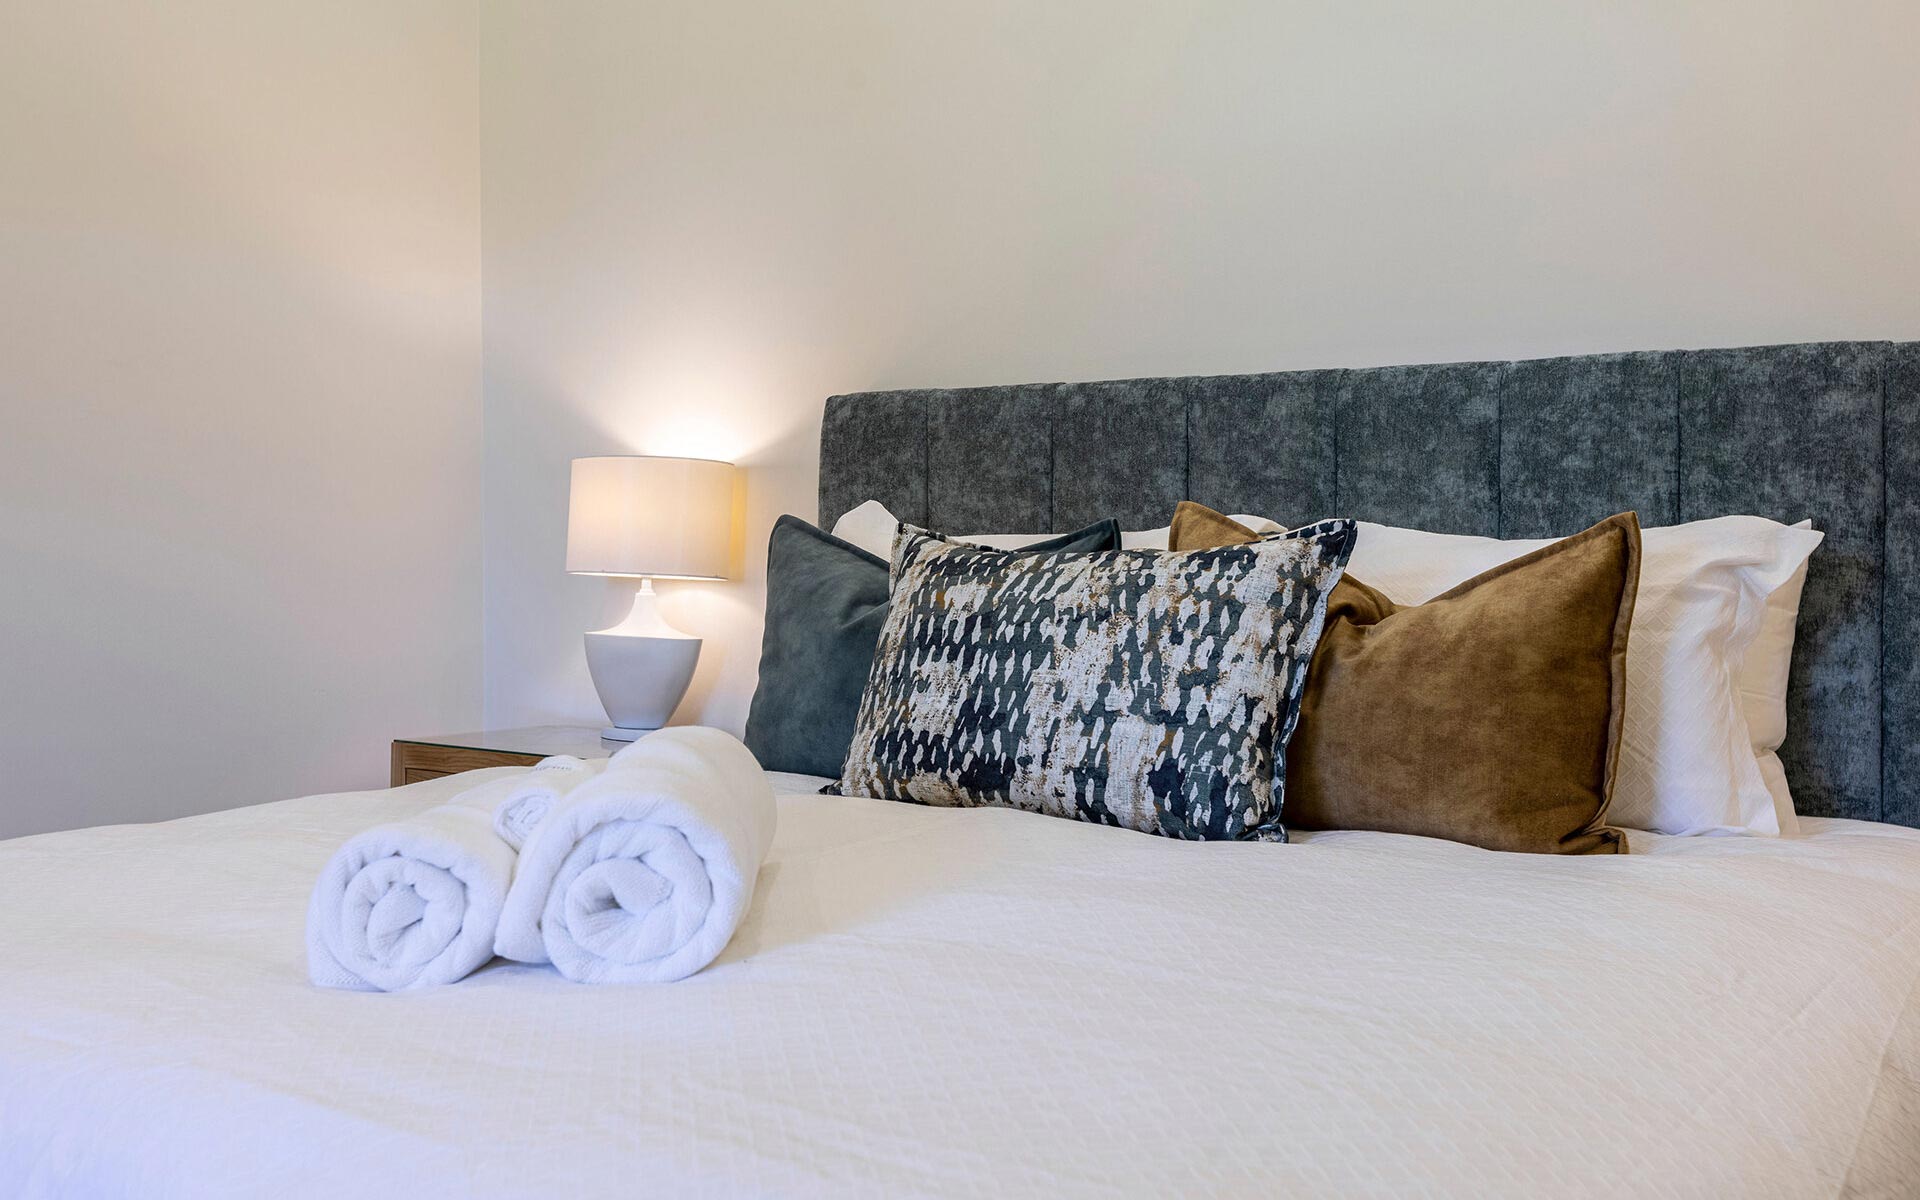 Schubert Estate accommodation, luxurious bed with pillows and towels